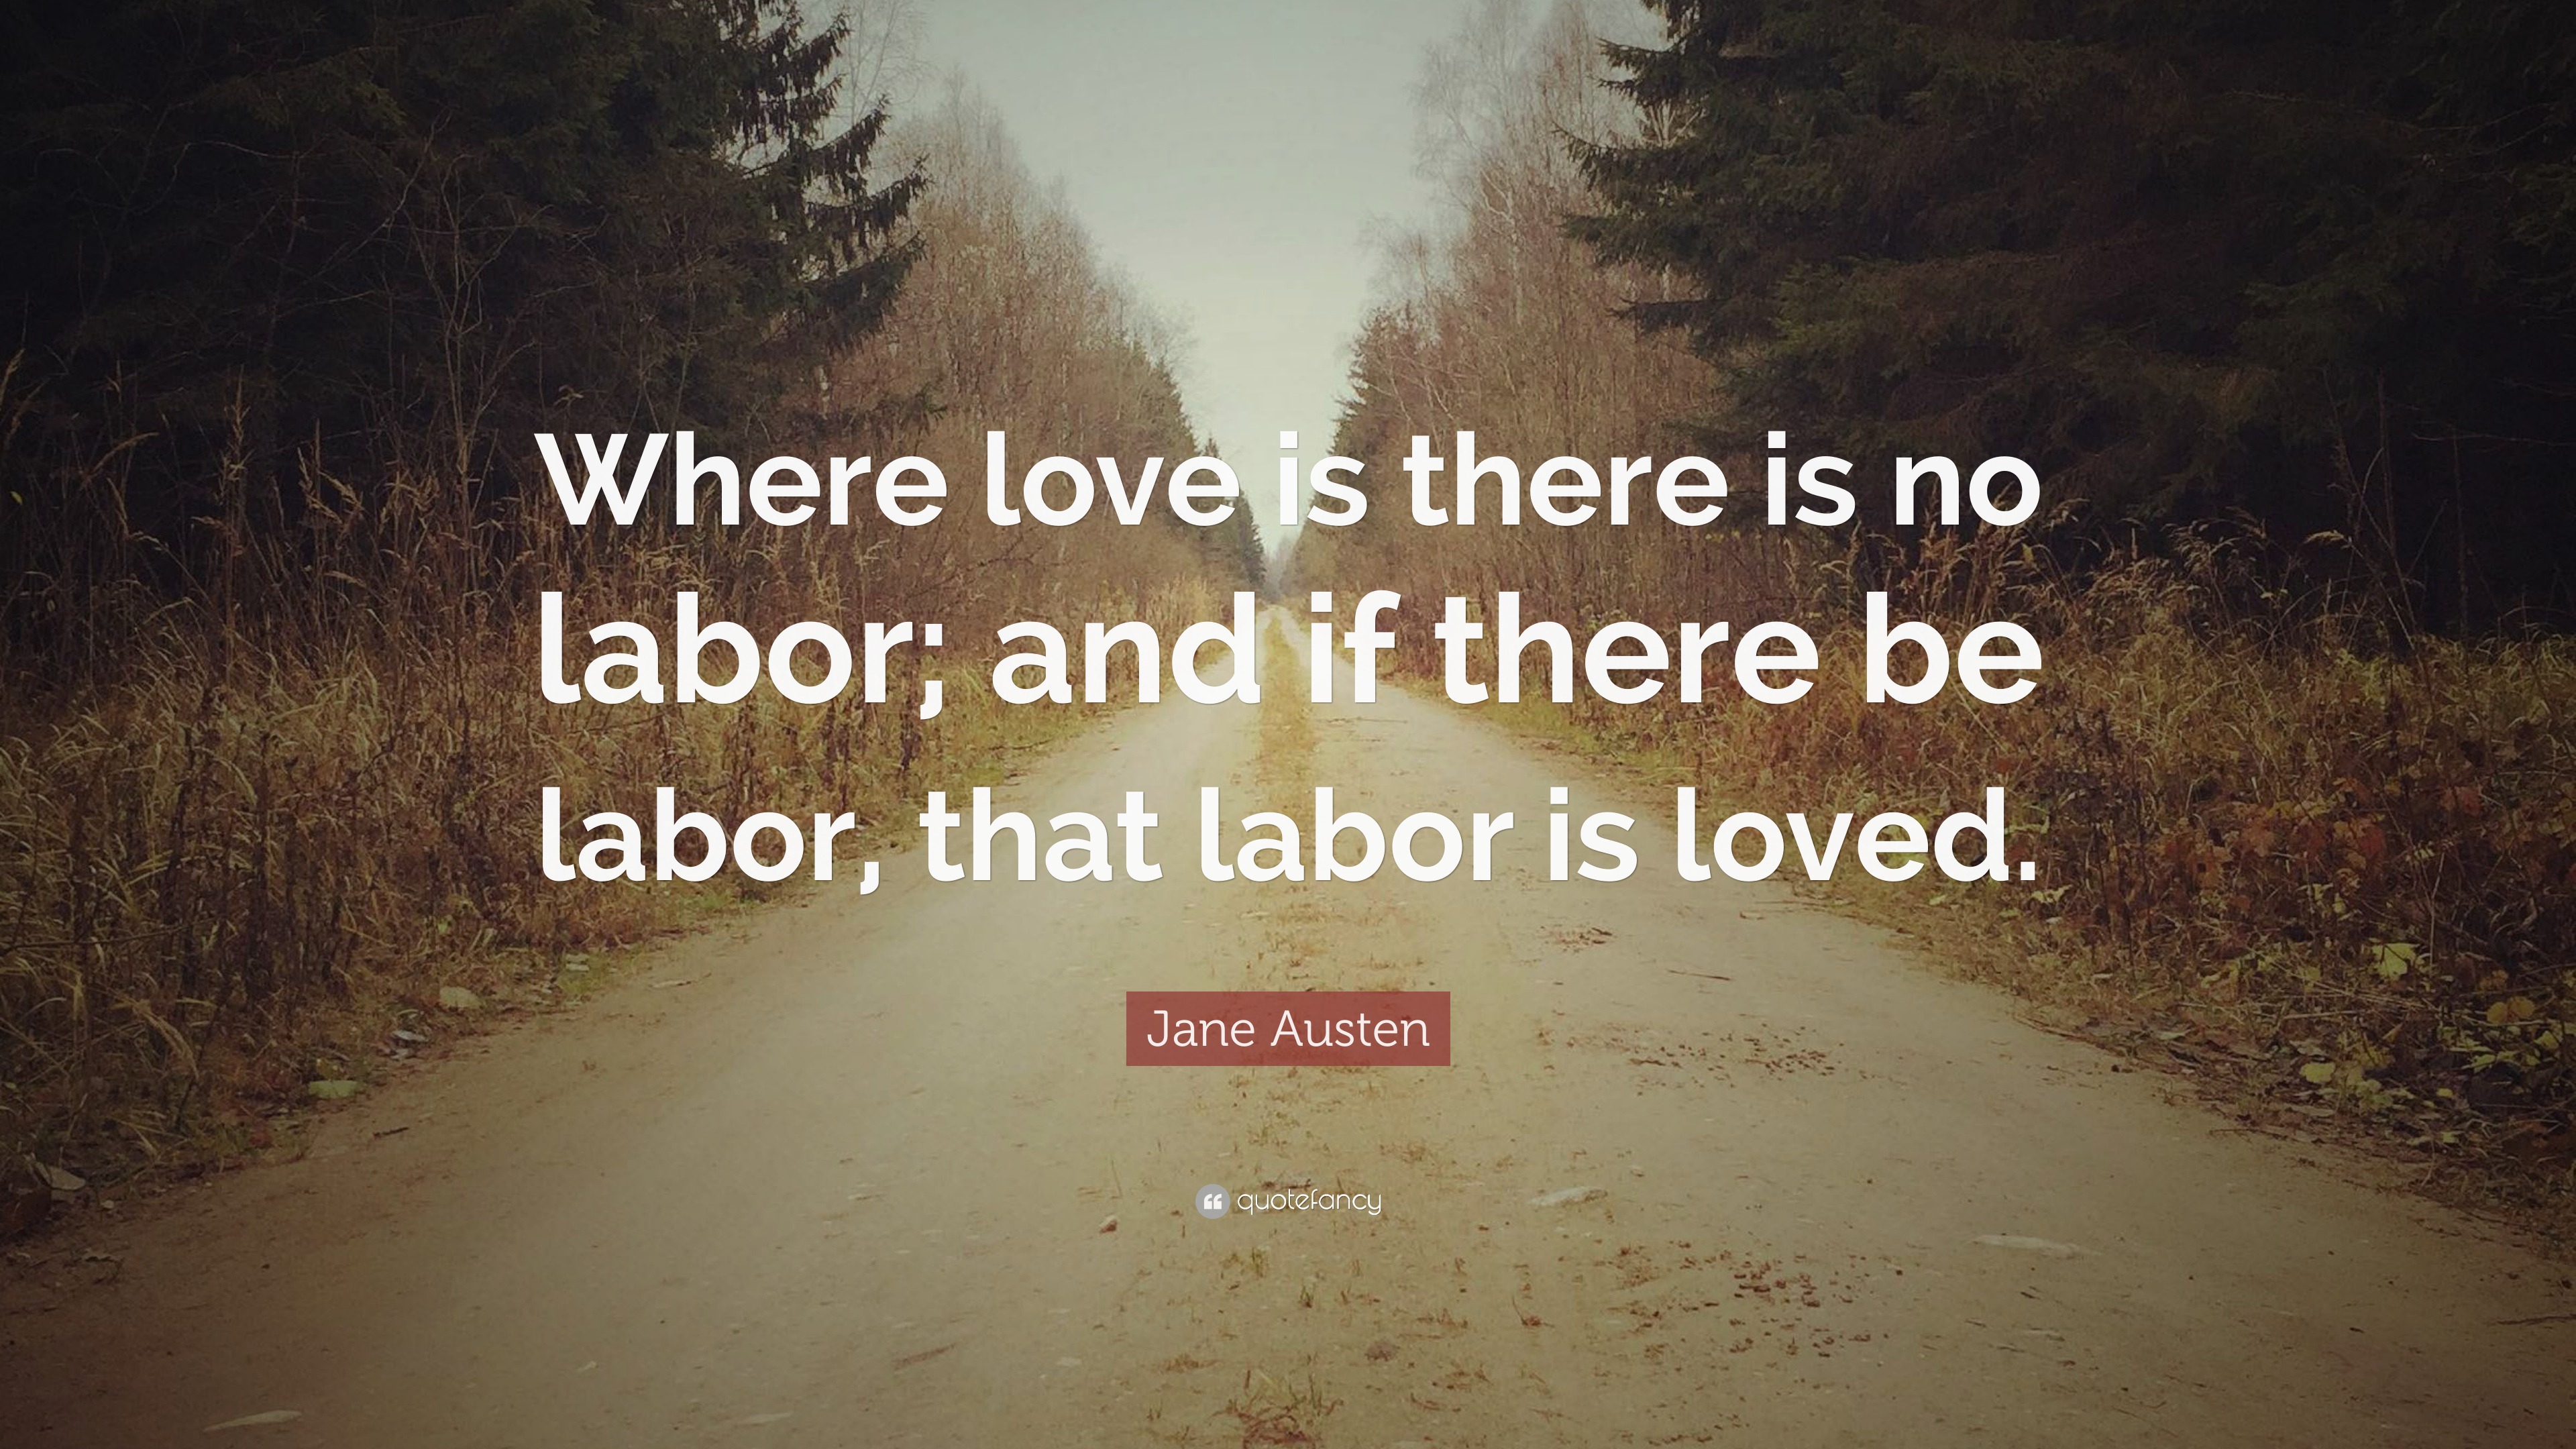 Jane Austen Quote “Where love is there is no labor and if there